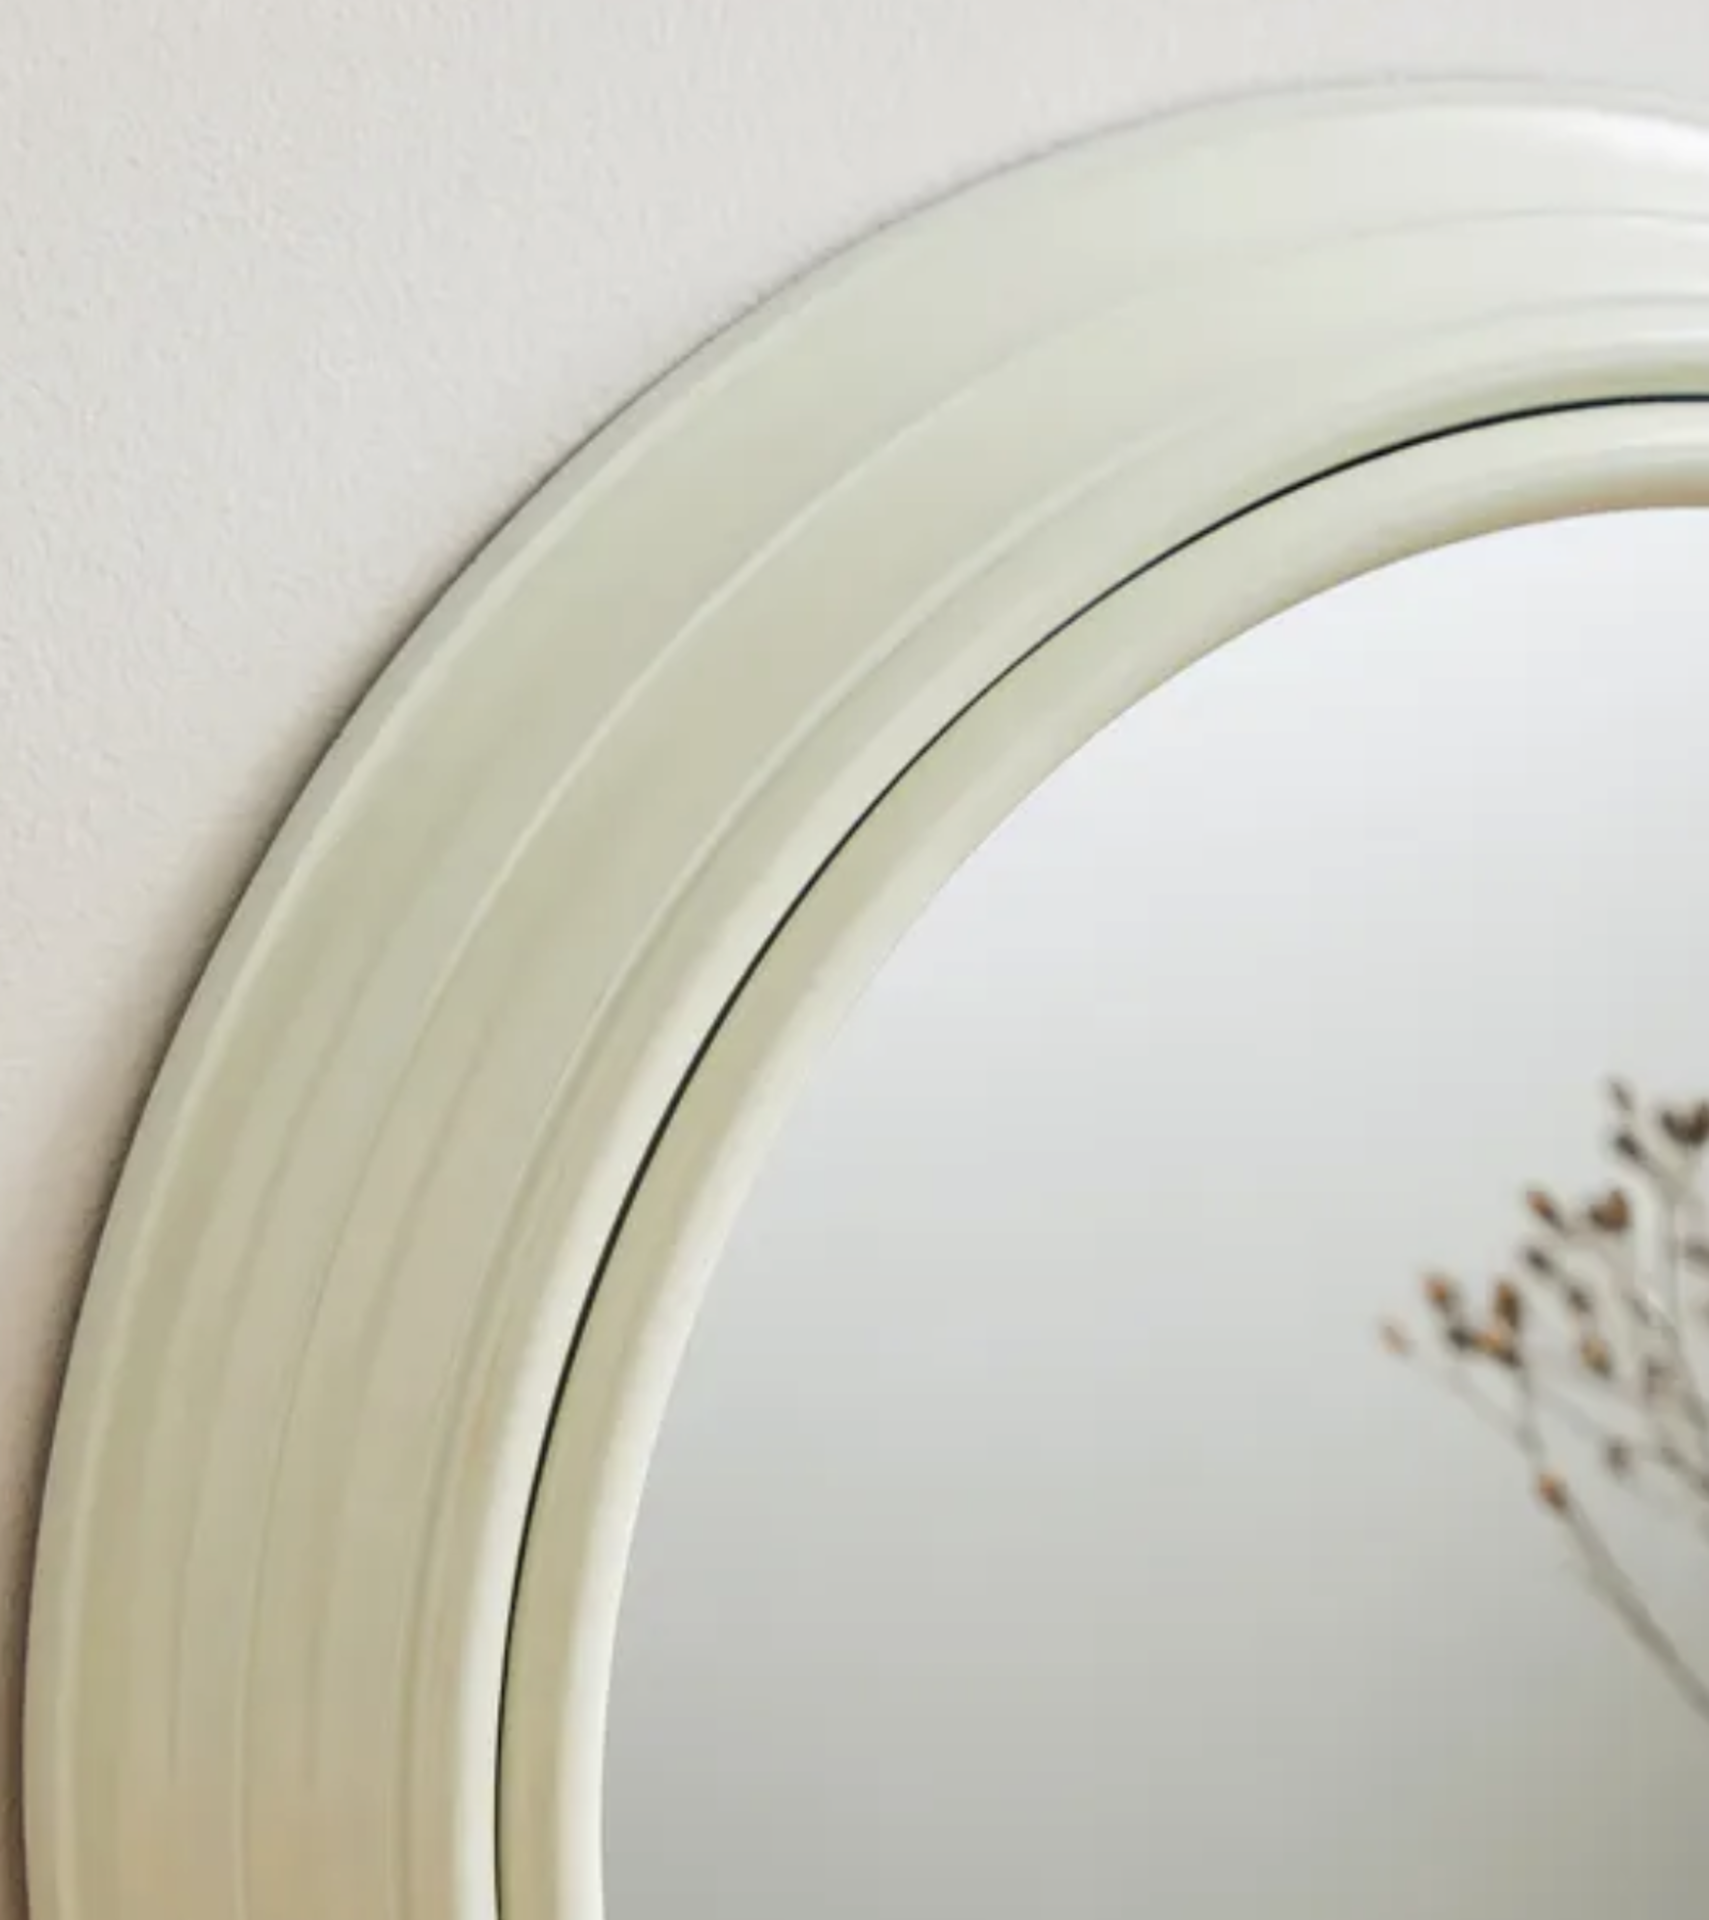 Cream Round 30cm Mirror - Brand New - A contemporary and timeless circular mirror - Image 2 of 3